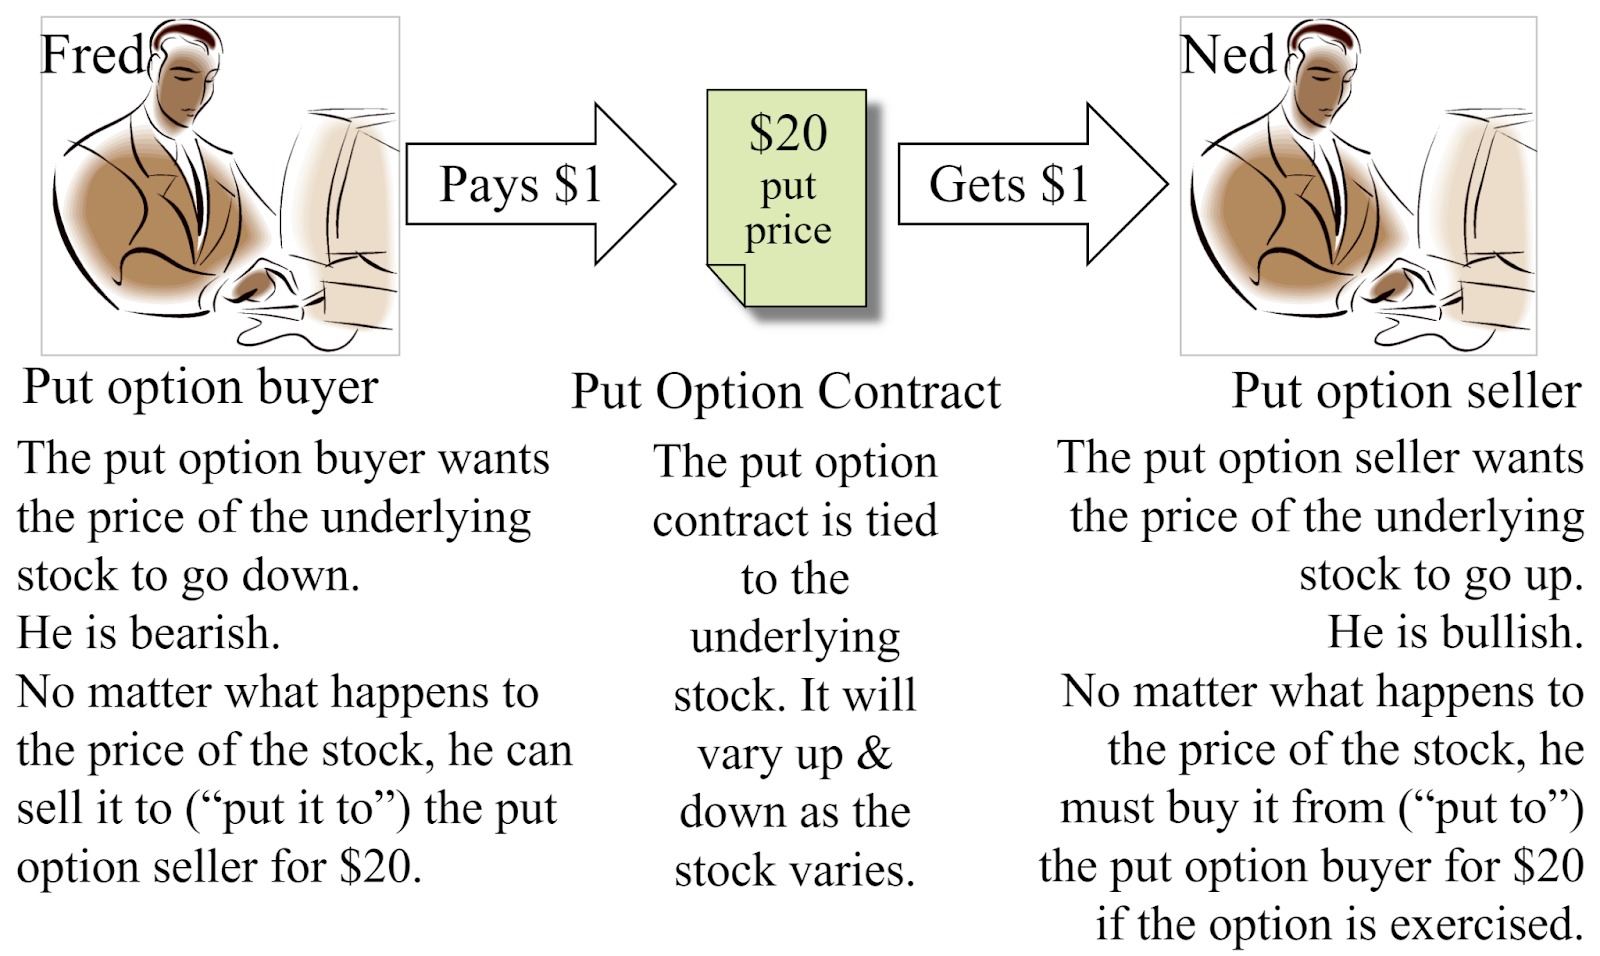 The graphic describes the two parties to a put option contract and their rights and responsibilities. 